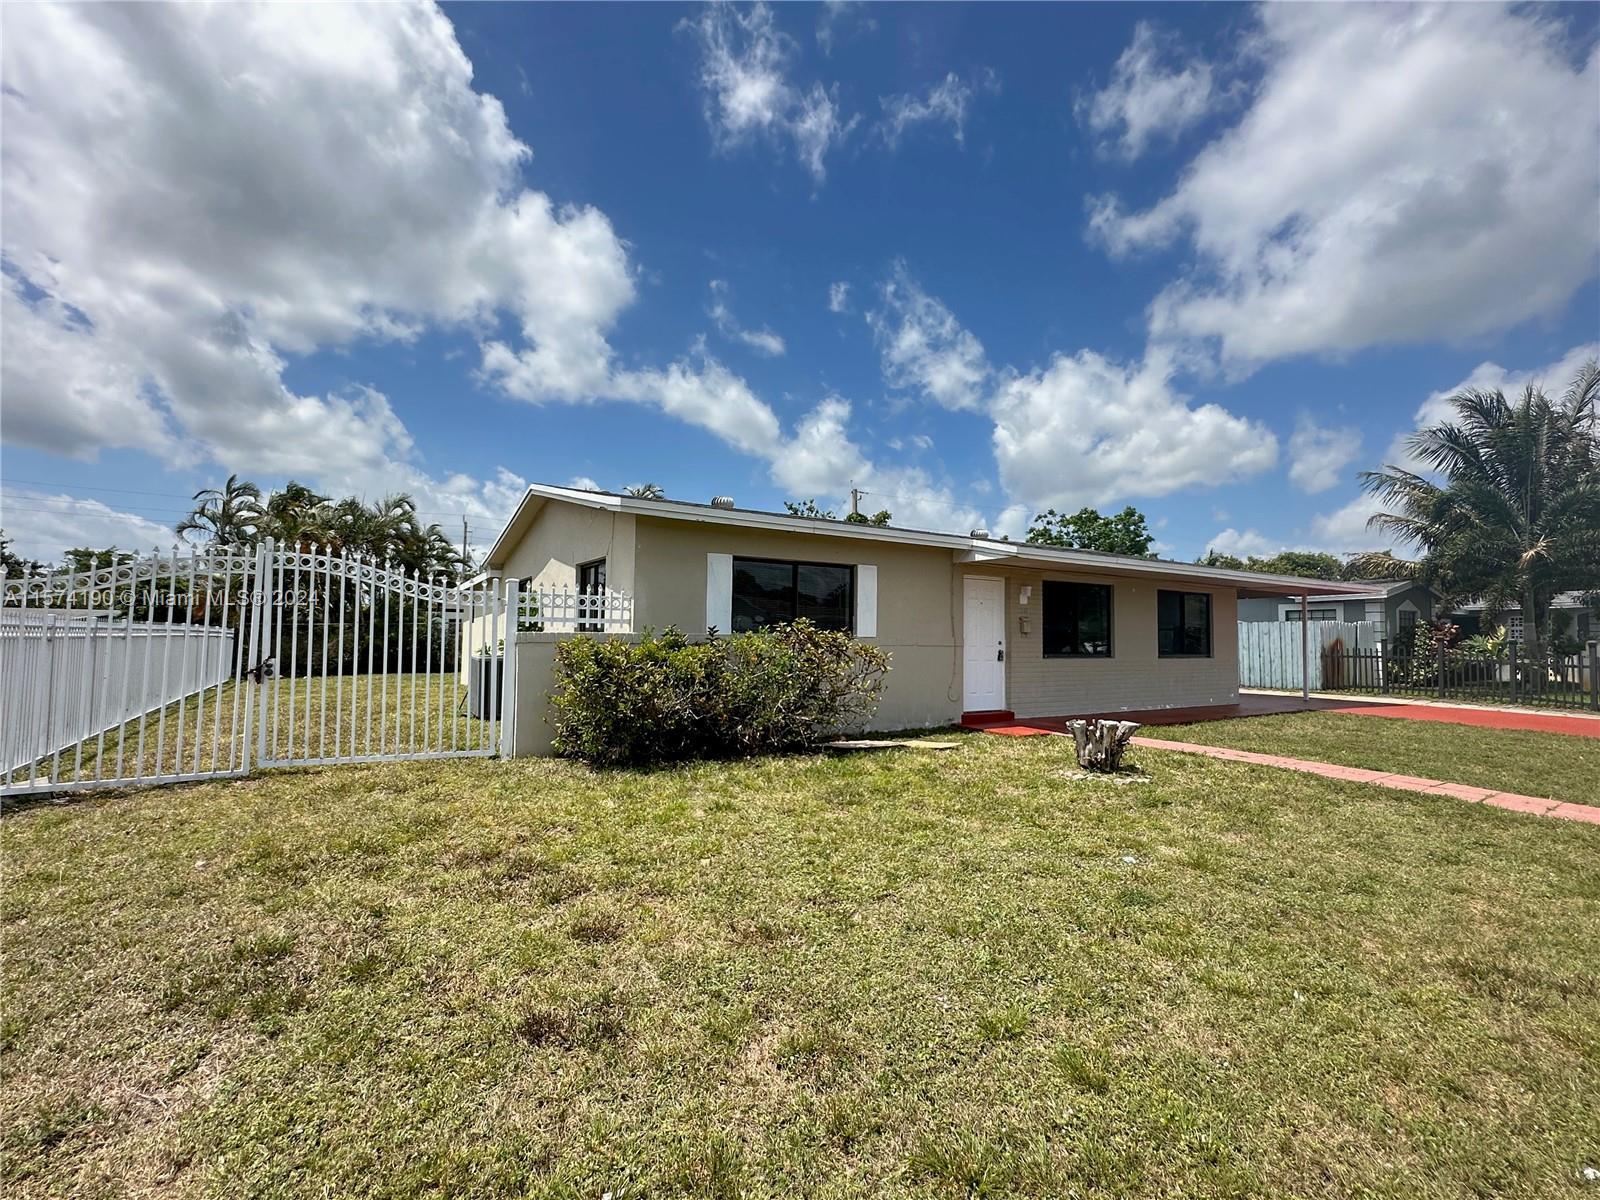 Photo of 1261 NW 54th Ter in Lauderhill, FL